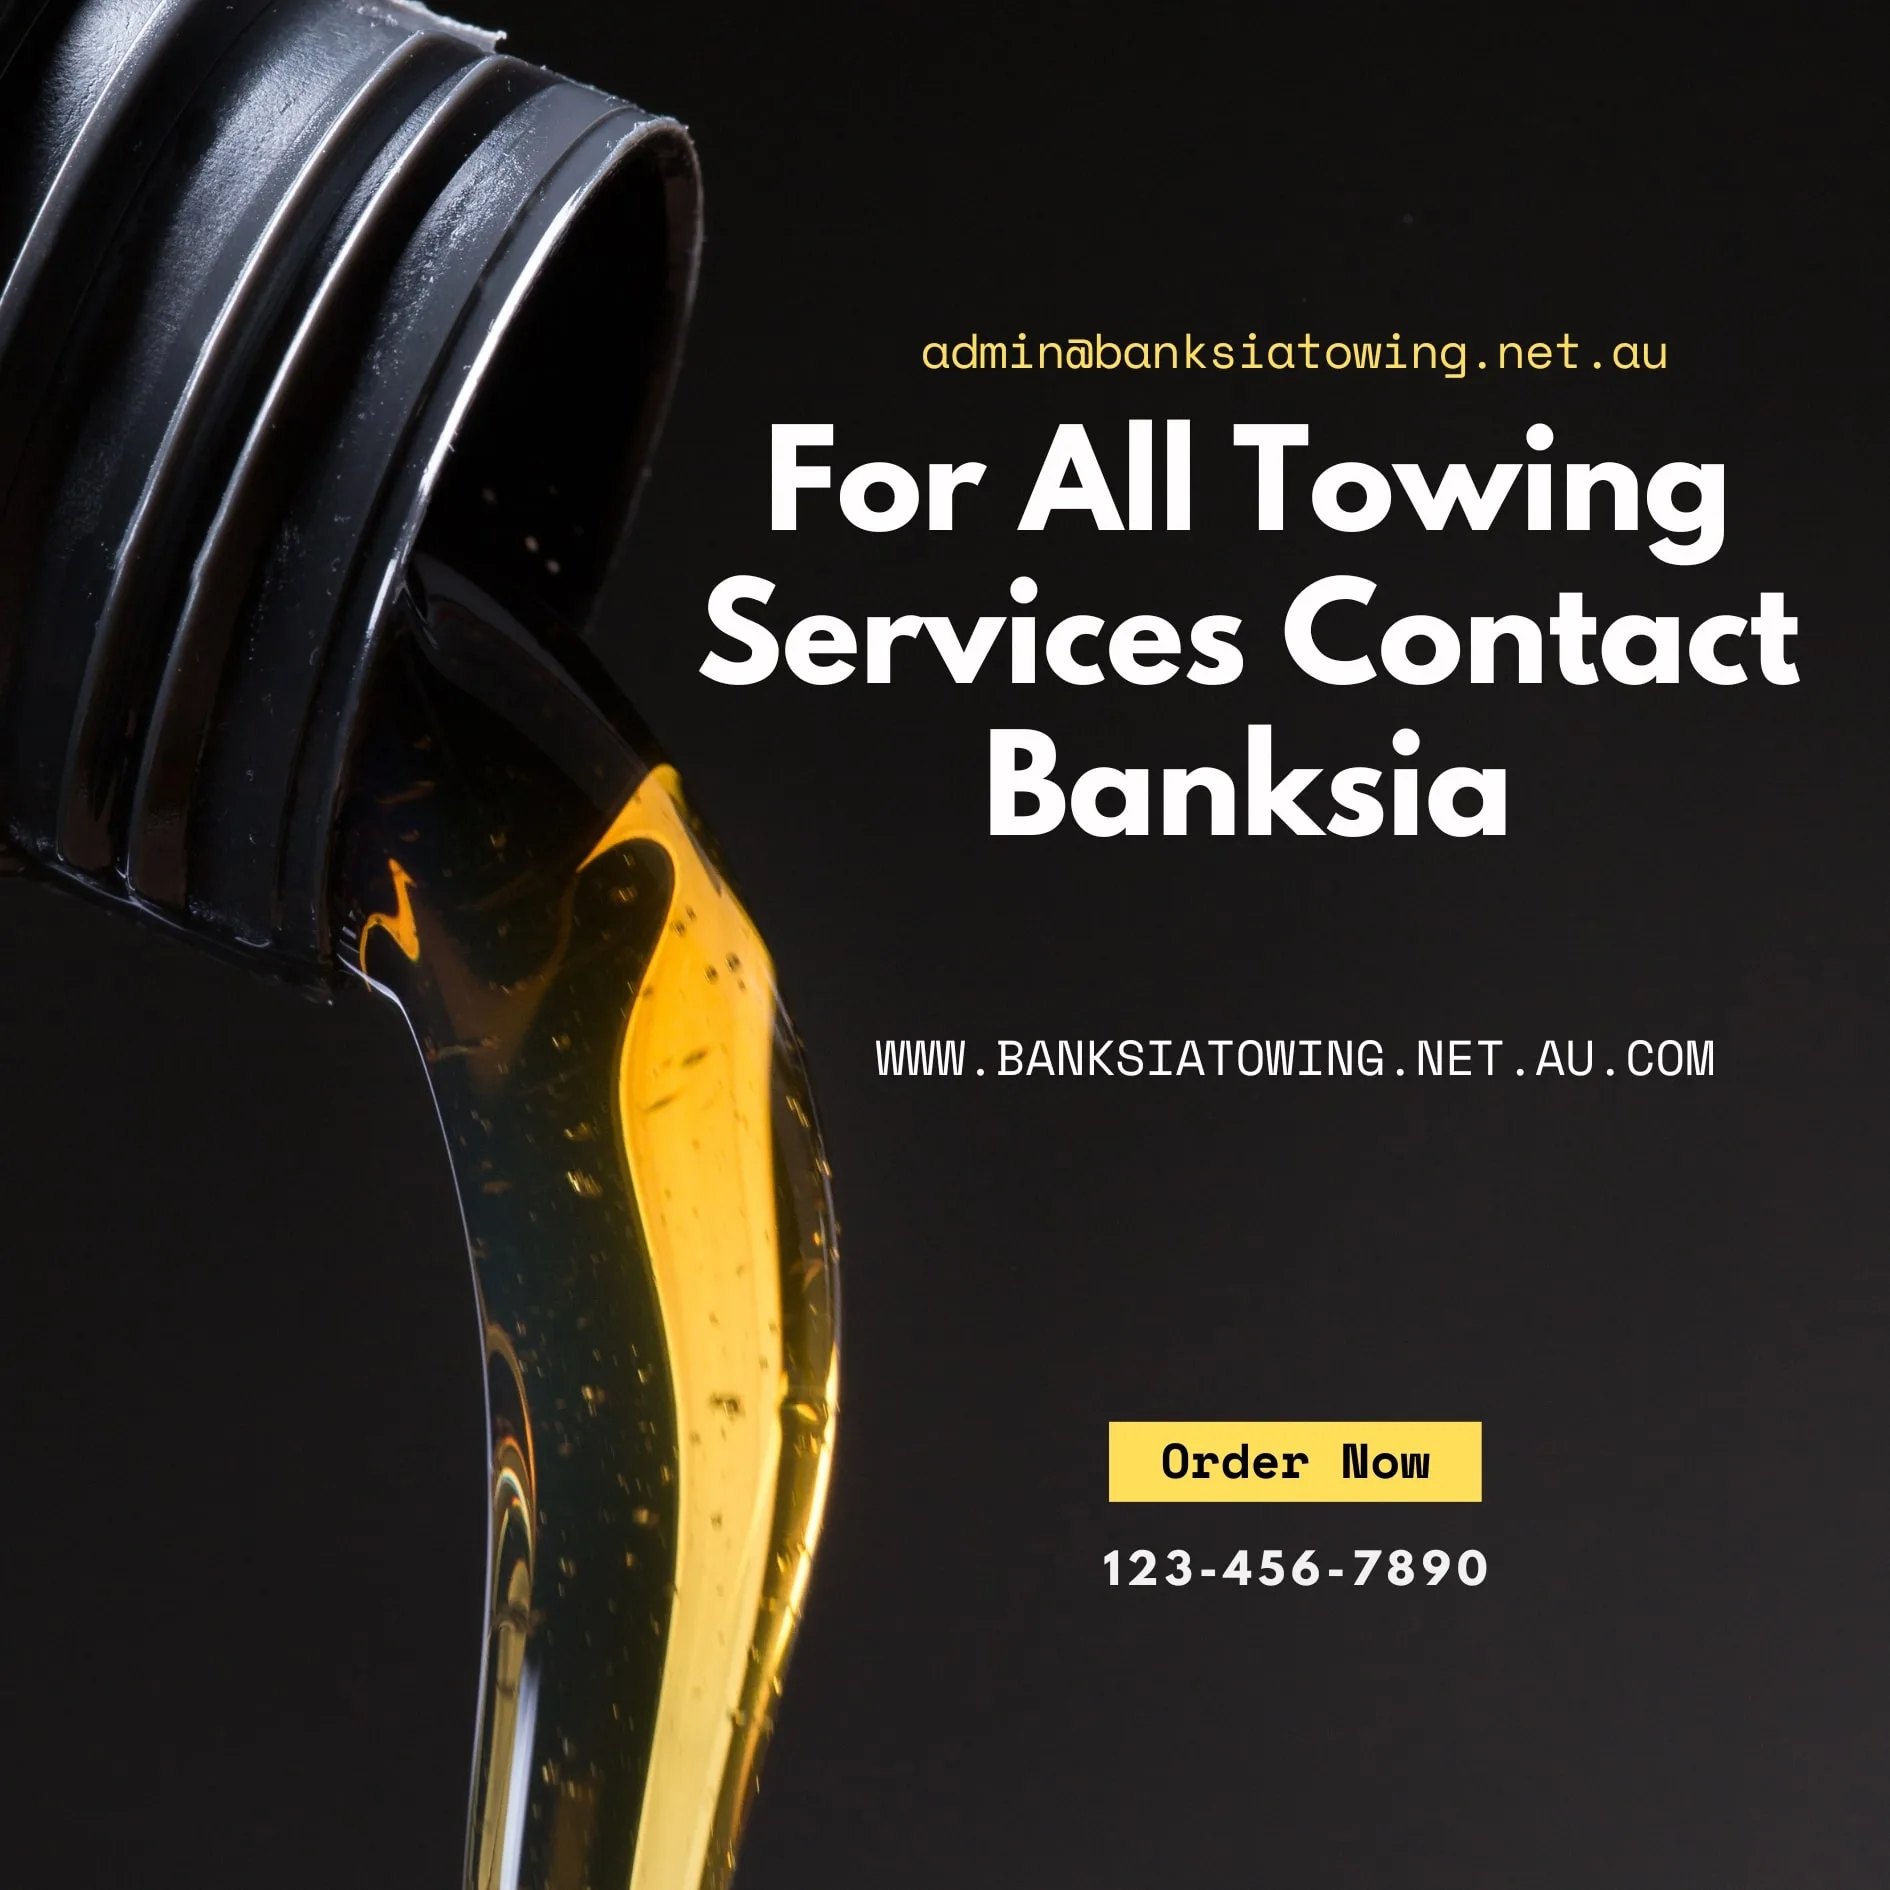 7 Fundamental Tips For Car Engine Care | Banksia Towing